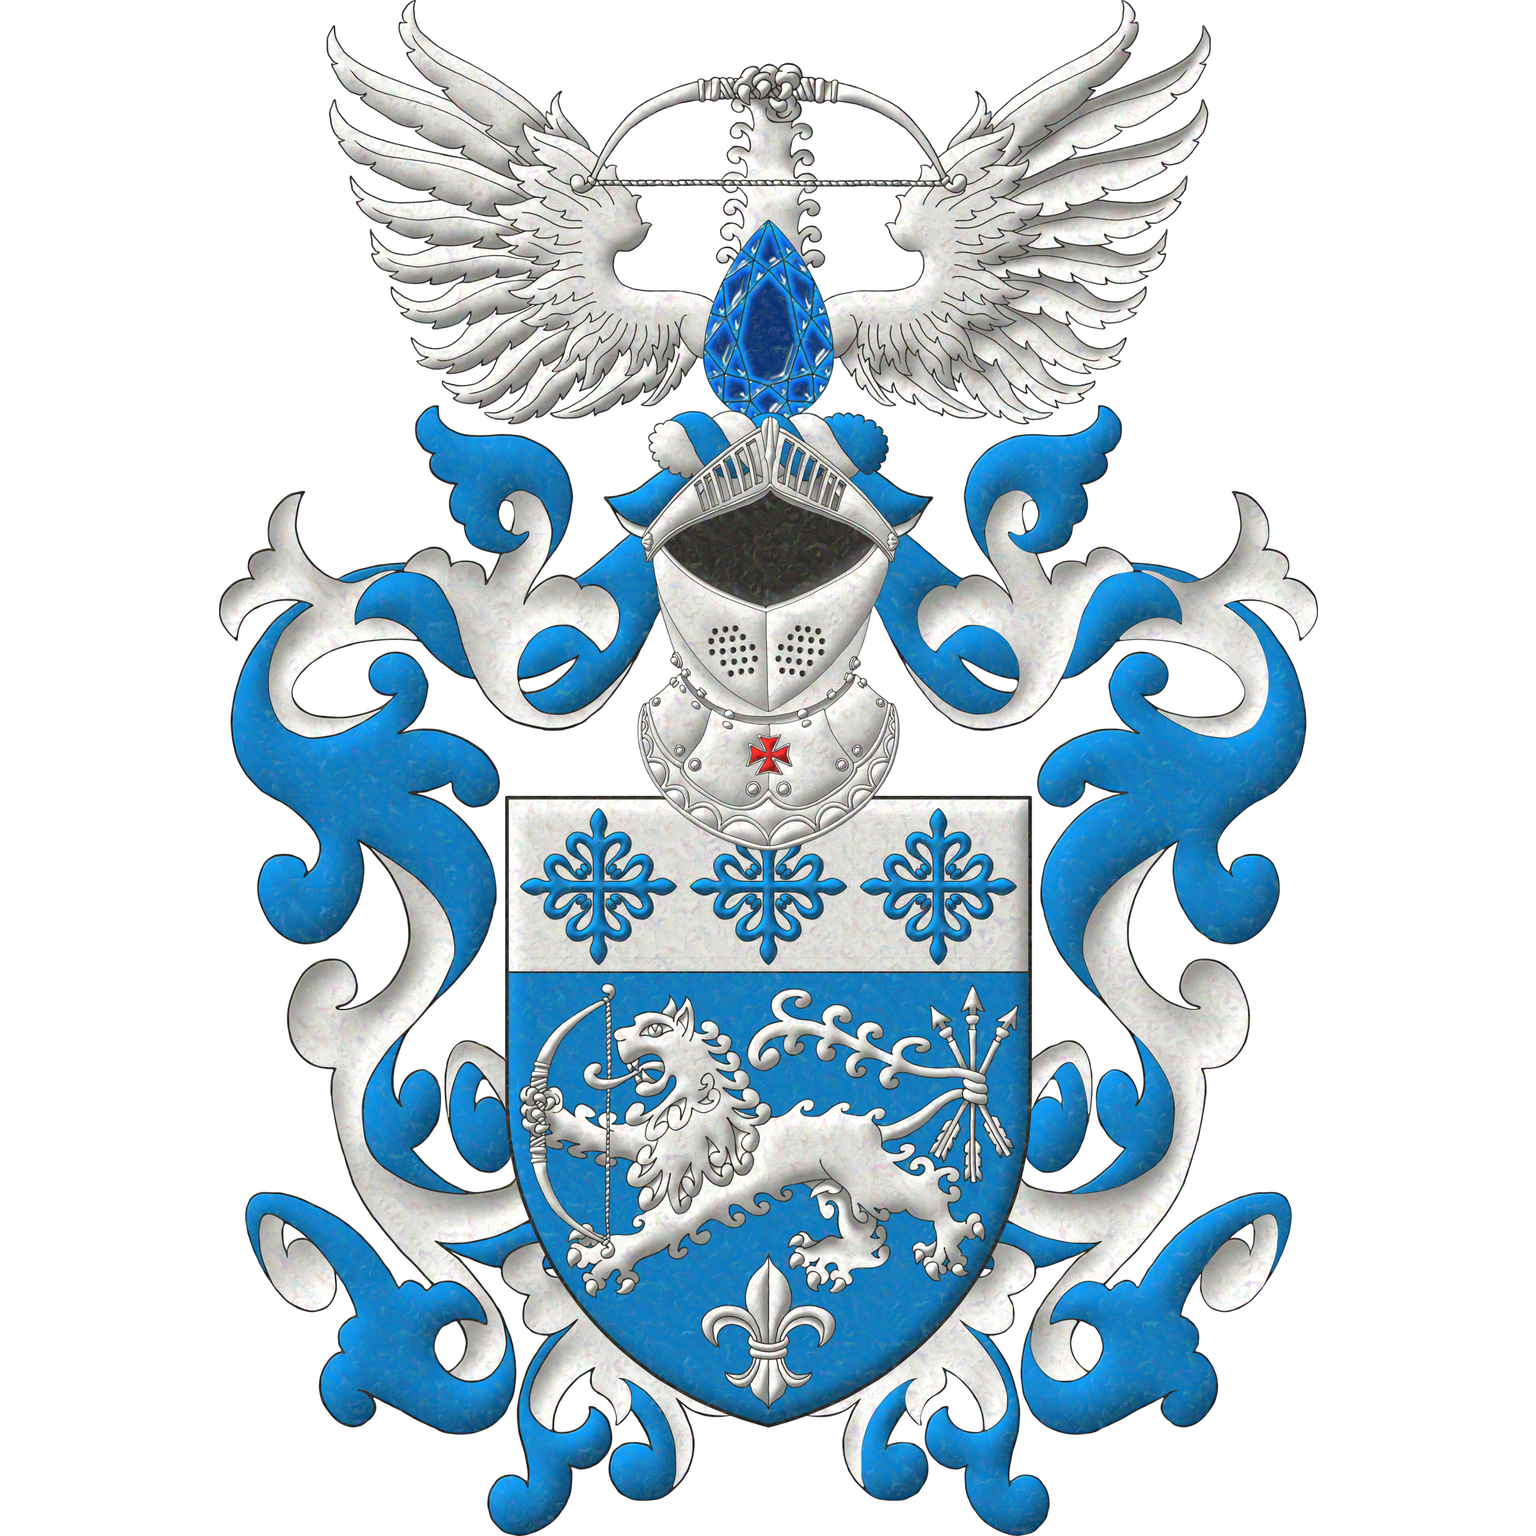 Azure, a lion passant, holding in its dexter paw a bow, and its tail nowed about three arrows points upward, in base a fleur de lis Argent; on a chief Argent, three crosses flory Azure. Crest: Upon a helm affronty, with a wreath Argent and Azure, and issuant from a pear-shaped sapphire proper, a lion's jamb palewise supporting a bow fesswise between a pair of wings Argent. Mantling: Azure doubled Argent.